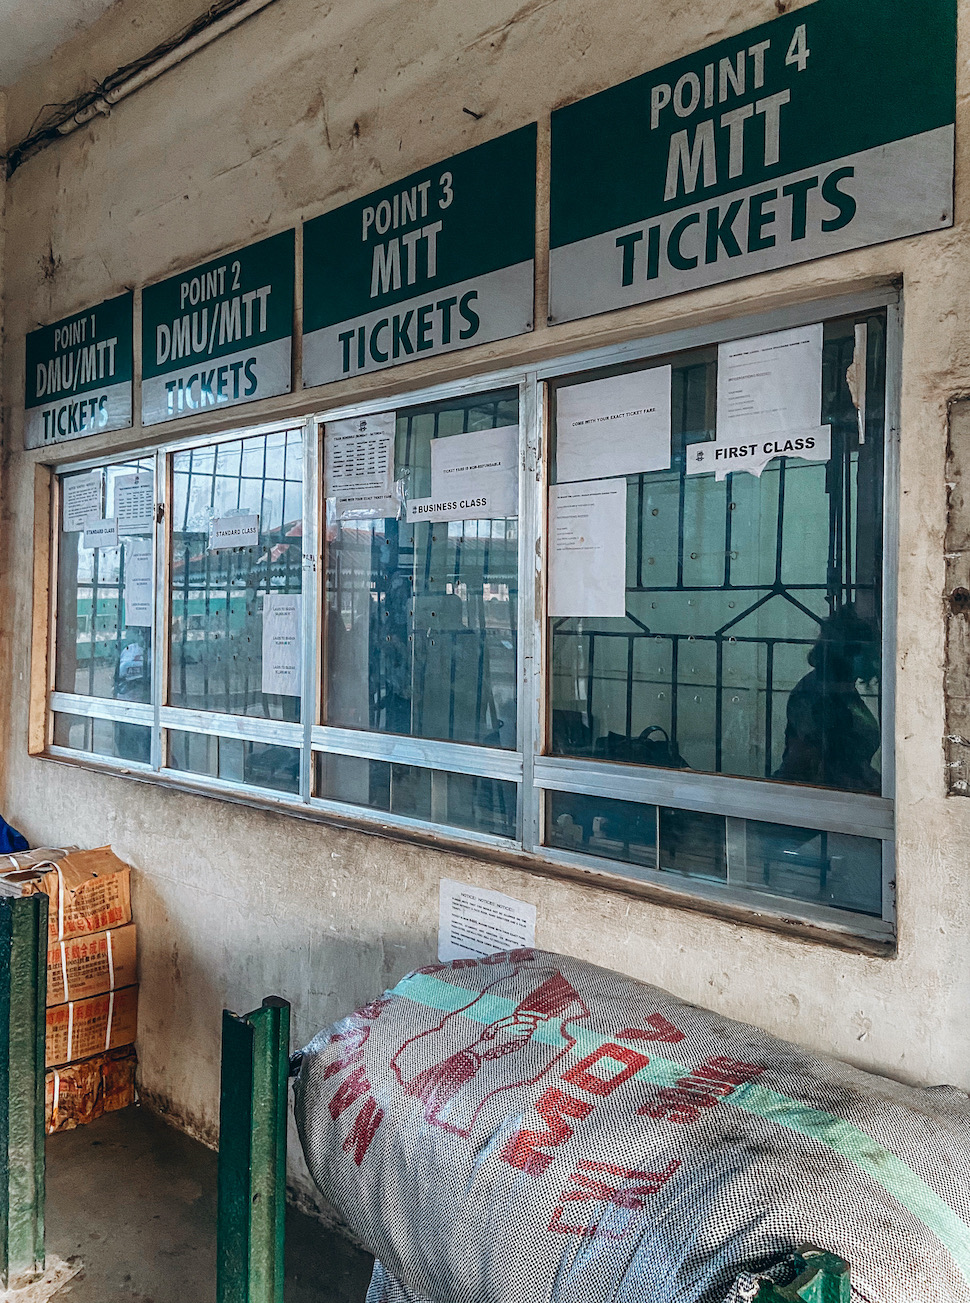 Ticket stand at lagos to ibadan train station